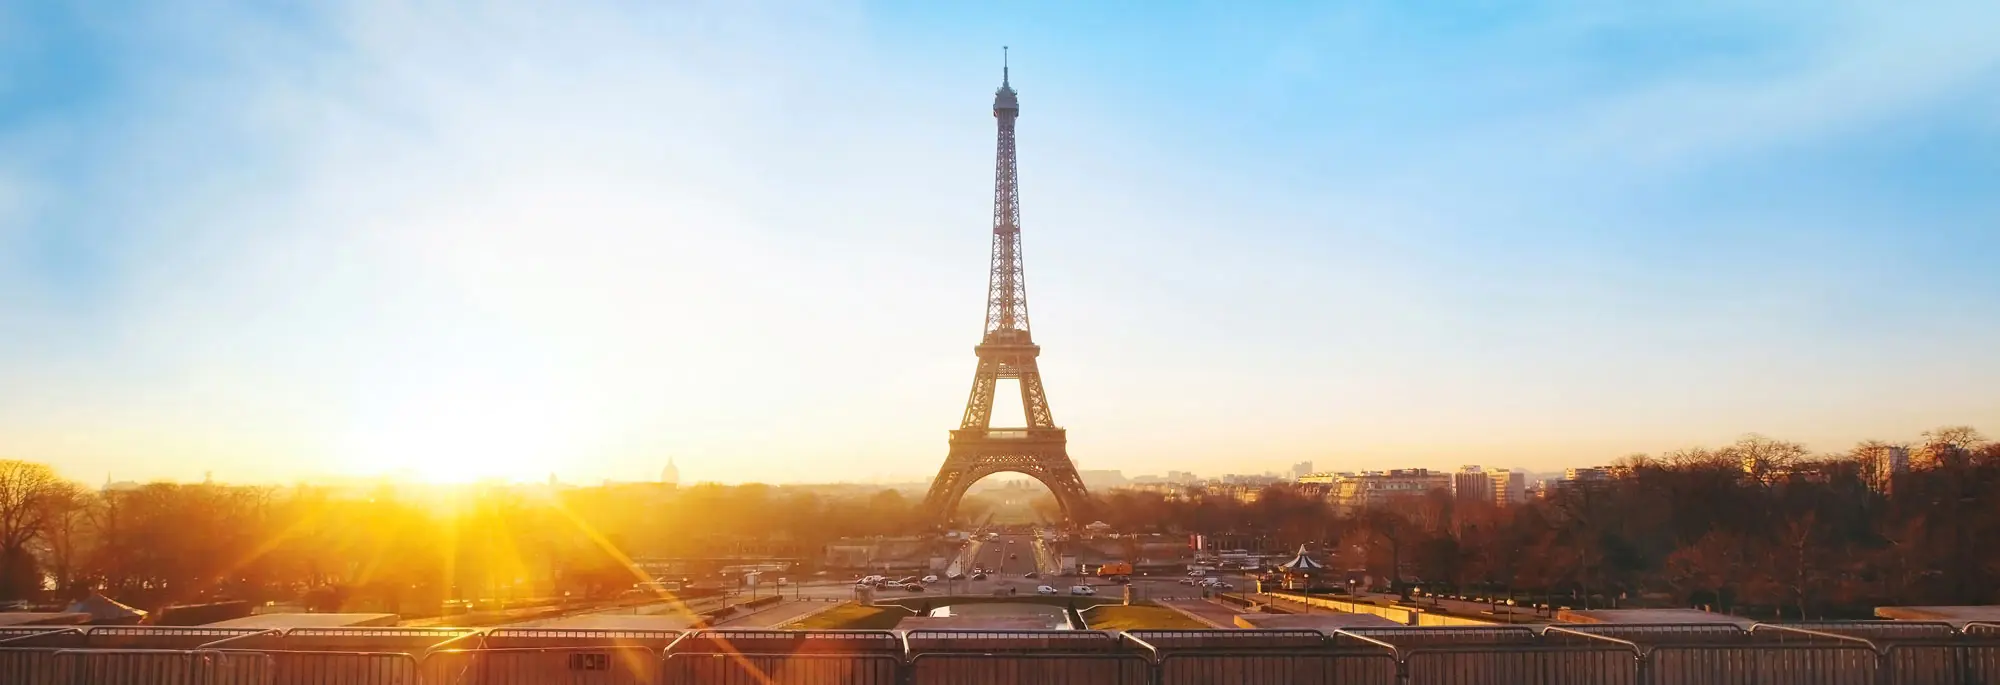 French language courses in France